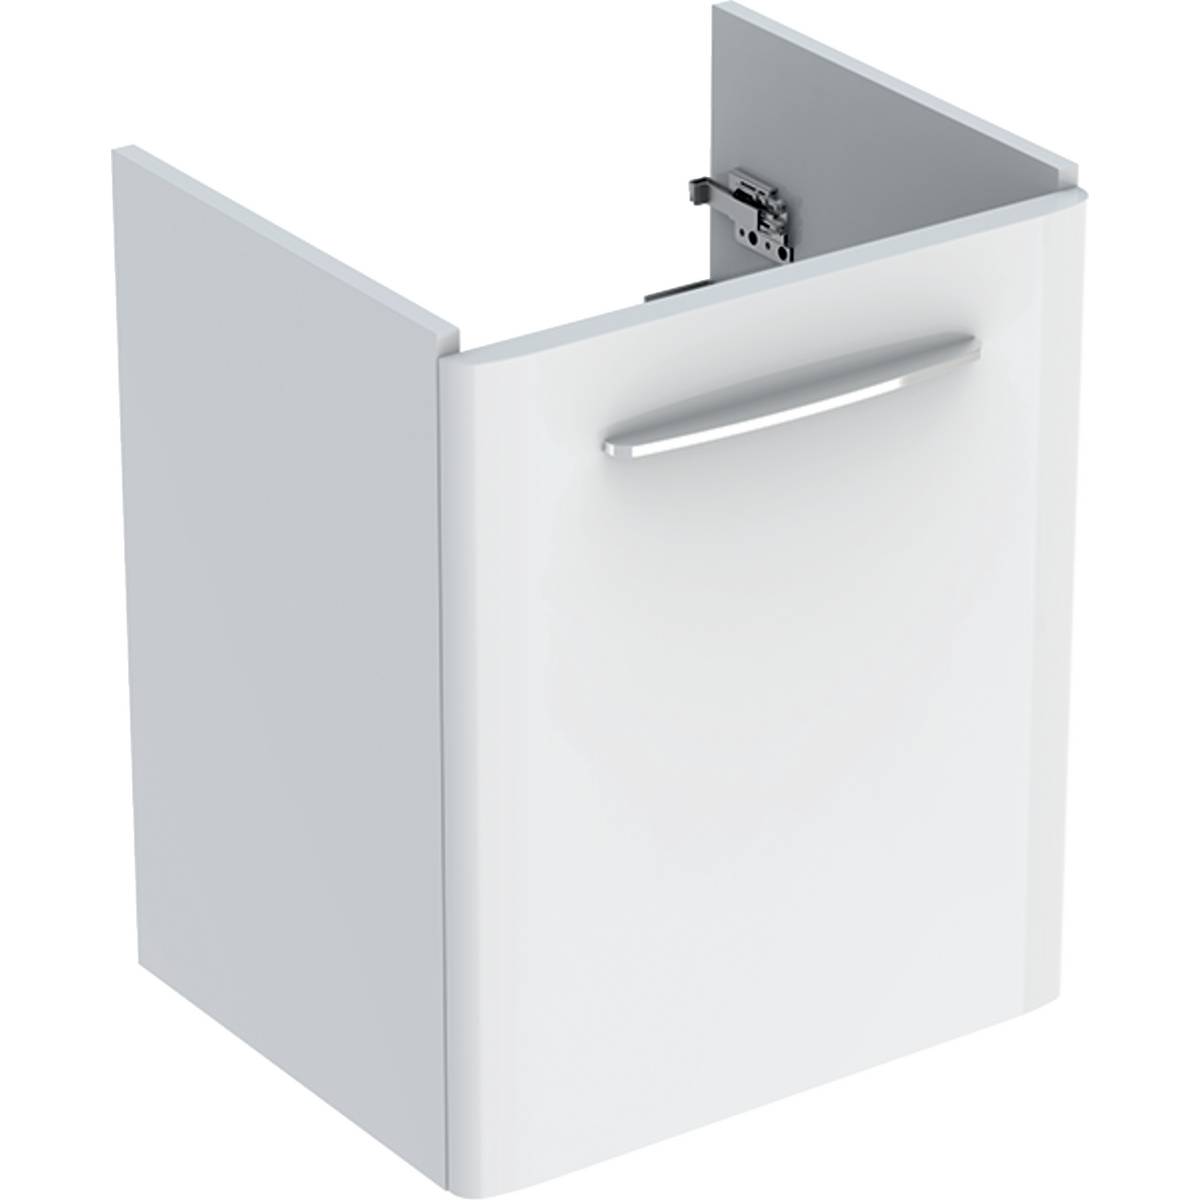 Selnova Square Cabinet for Washbasin, with One Door and Service Space